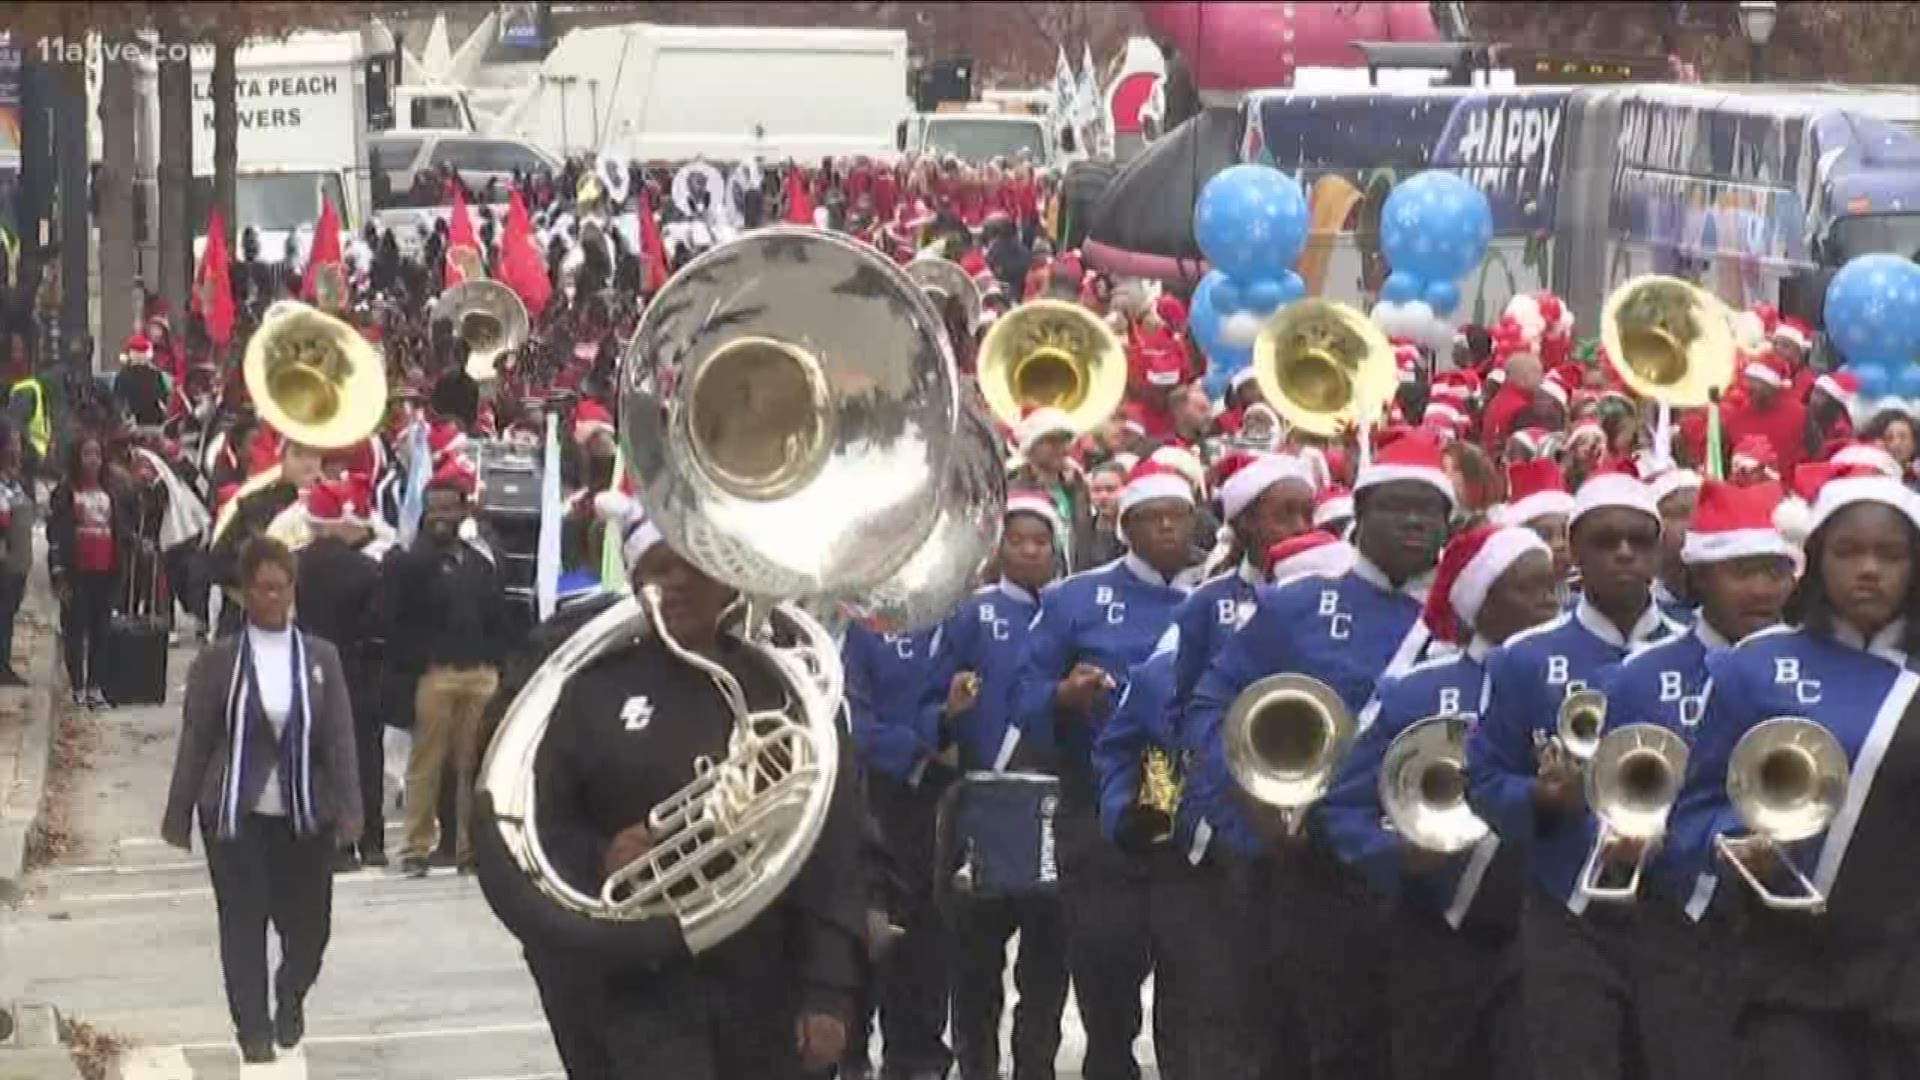 More than a dozen marching bands entertained the crowd along with floats and giant balloons.